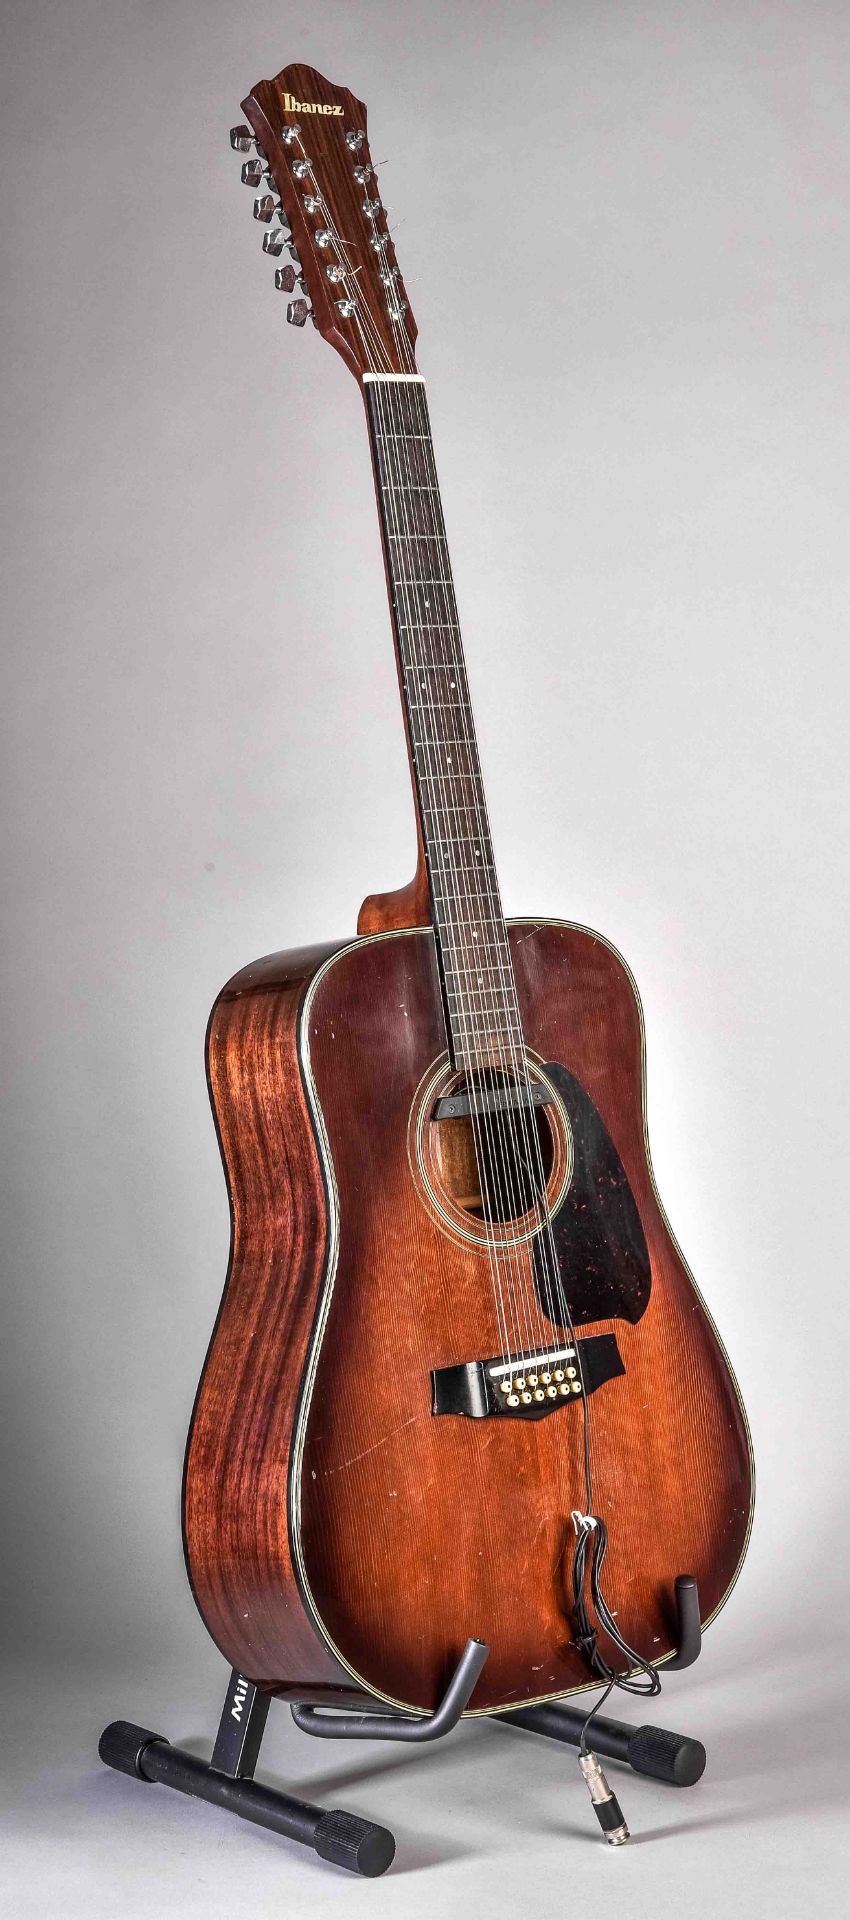 Vintage 12-string acoustic western guitar Ibanez, model V302 TV, dreadnought, with a later built-in - Image 2 of 9